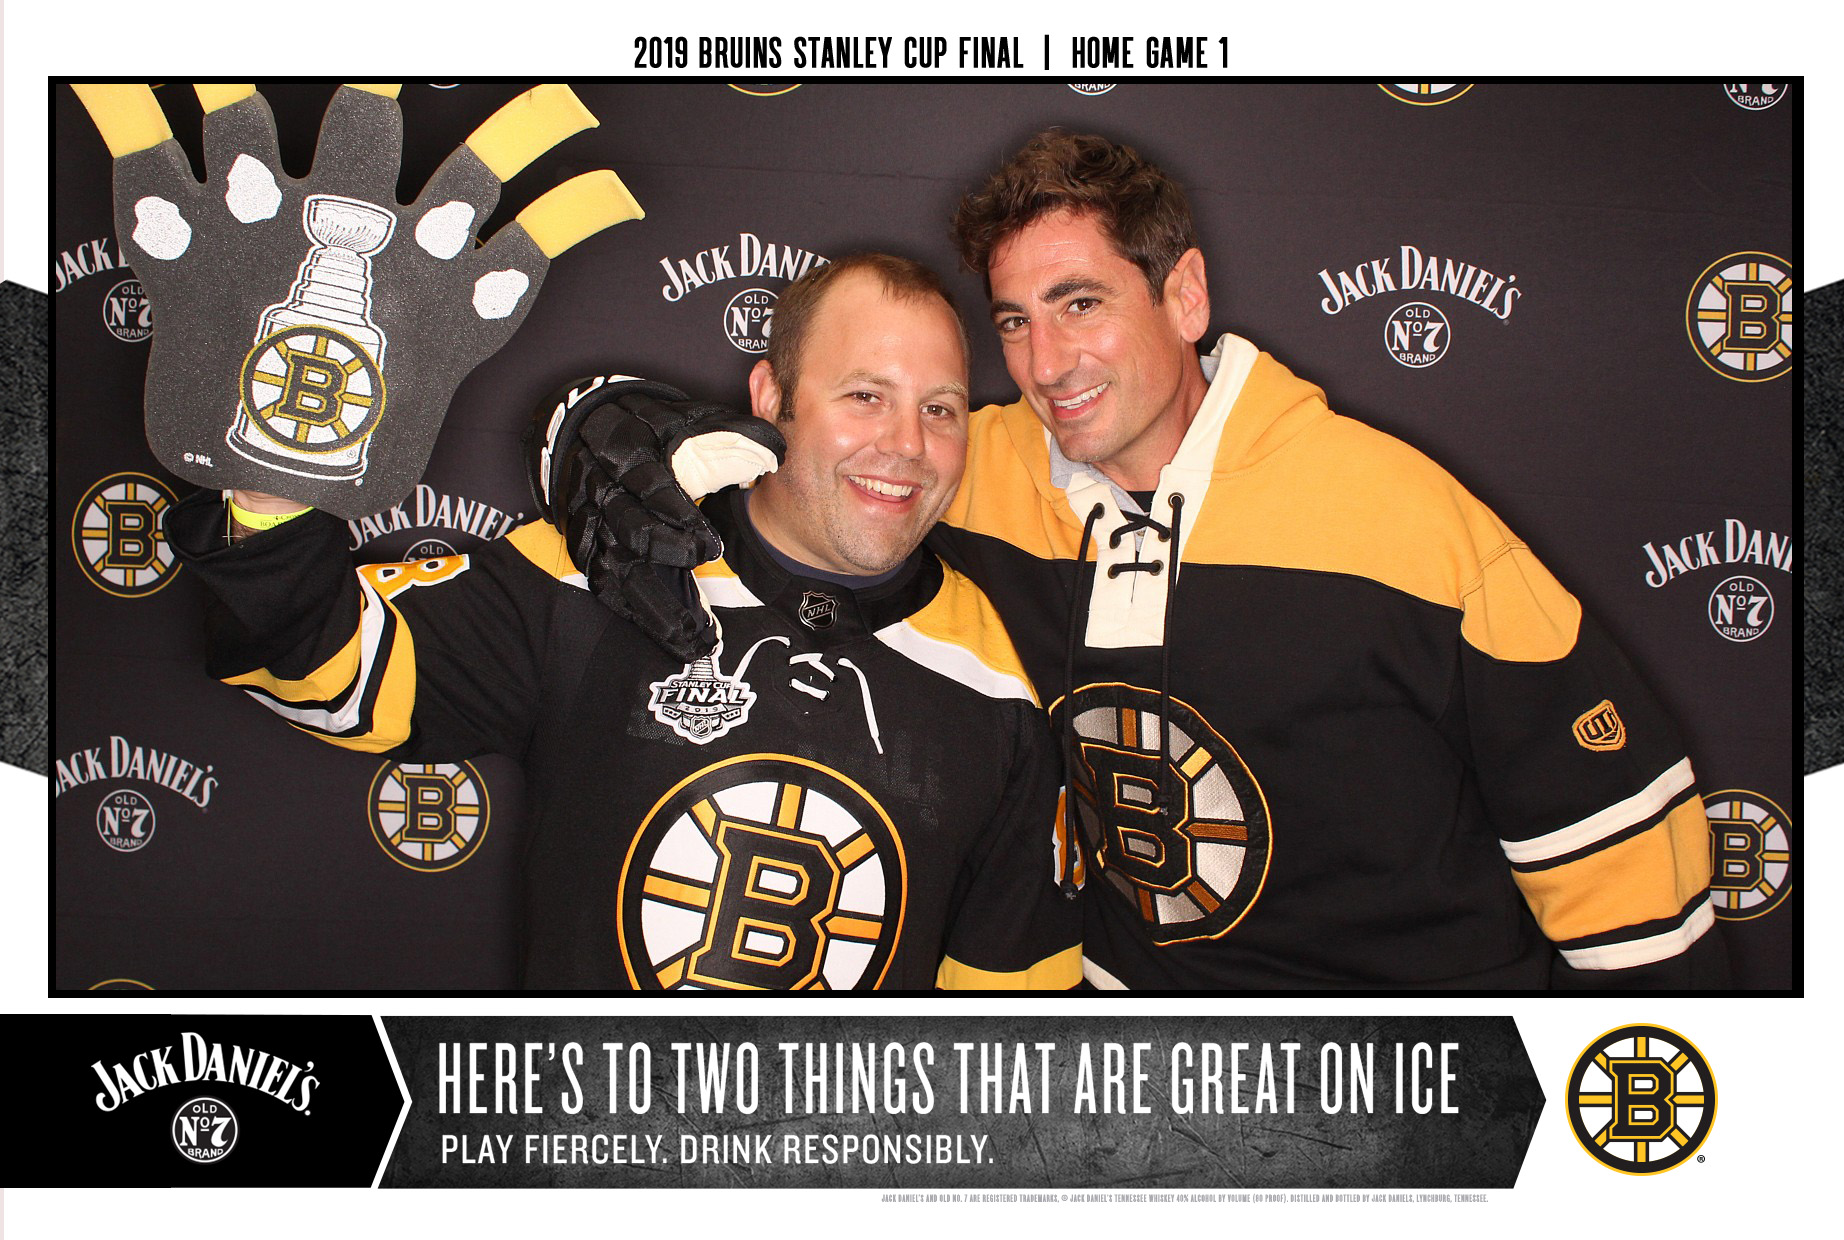 Co-Branded Photo Booth at Stanley Cup Finals with Jack Daniels